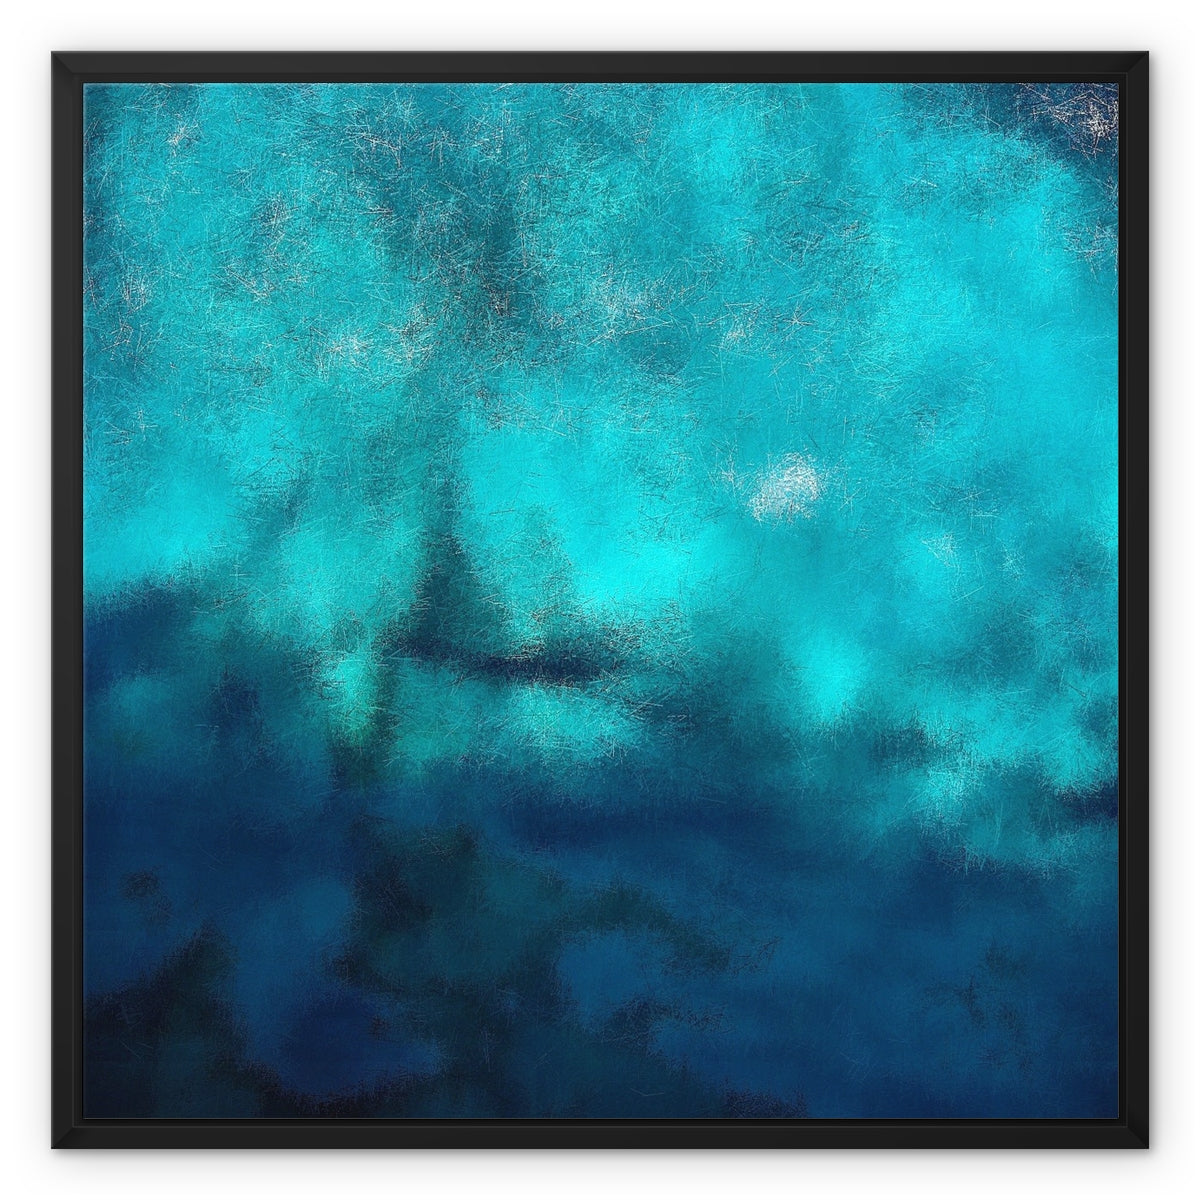 Diving Off Kos Greece Painting | Framed Canvas From Scotland-Floating Framed Canvas Prints-World Art Gallery-24"x24"-Black Frame-Paintings, Prints, Homeware, Art Gifts From Scotland By Scottish Artist Kevin Hunter